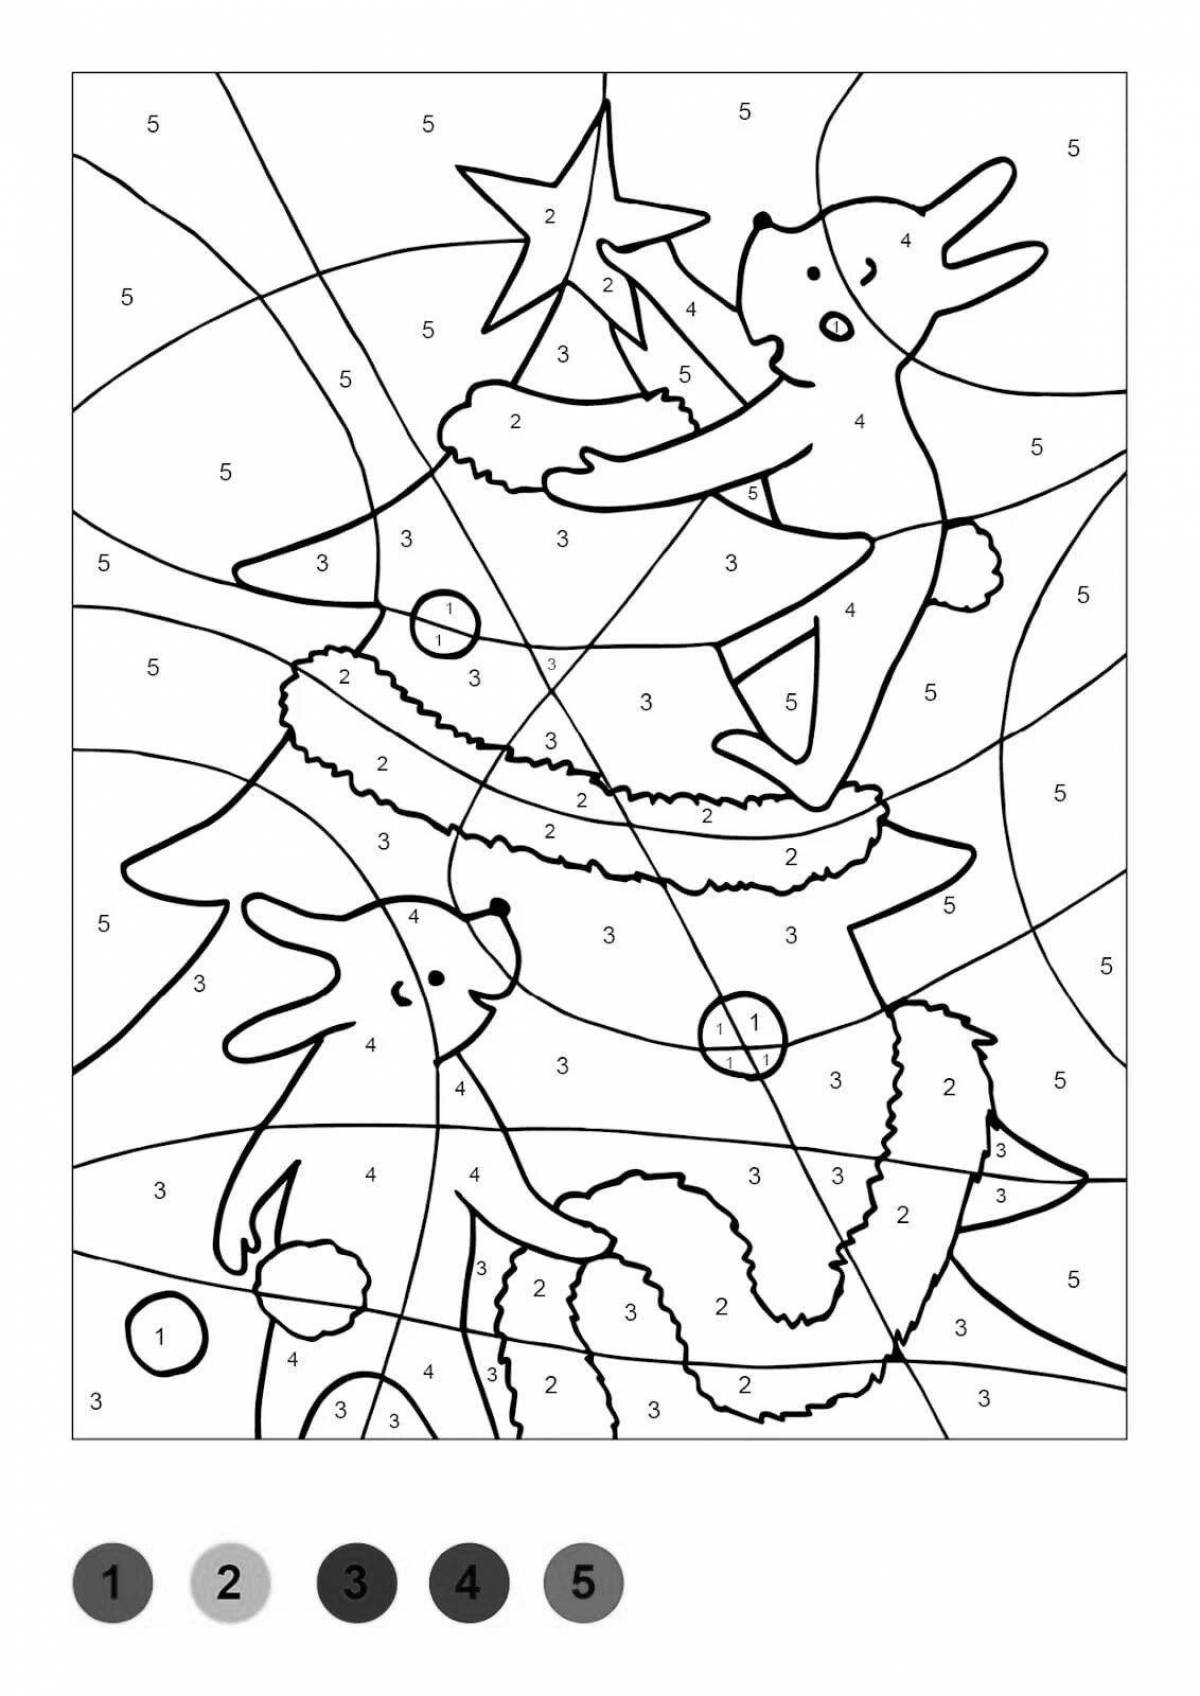 Merry Christmas by number coloring book for kids